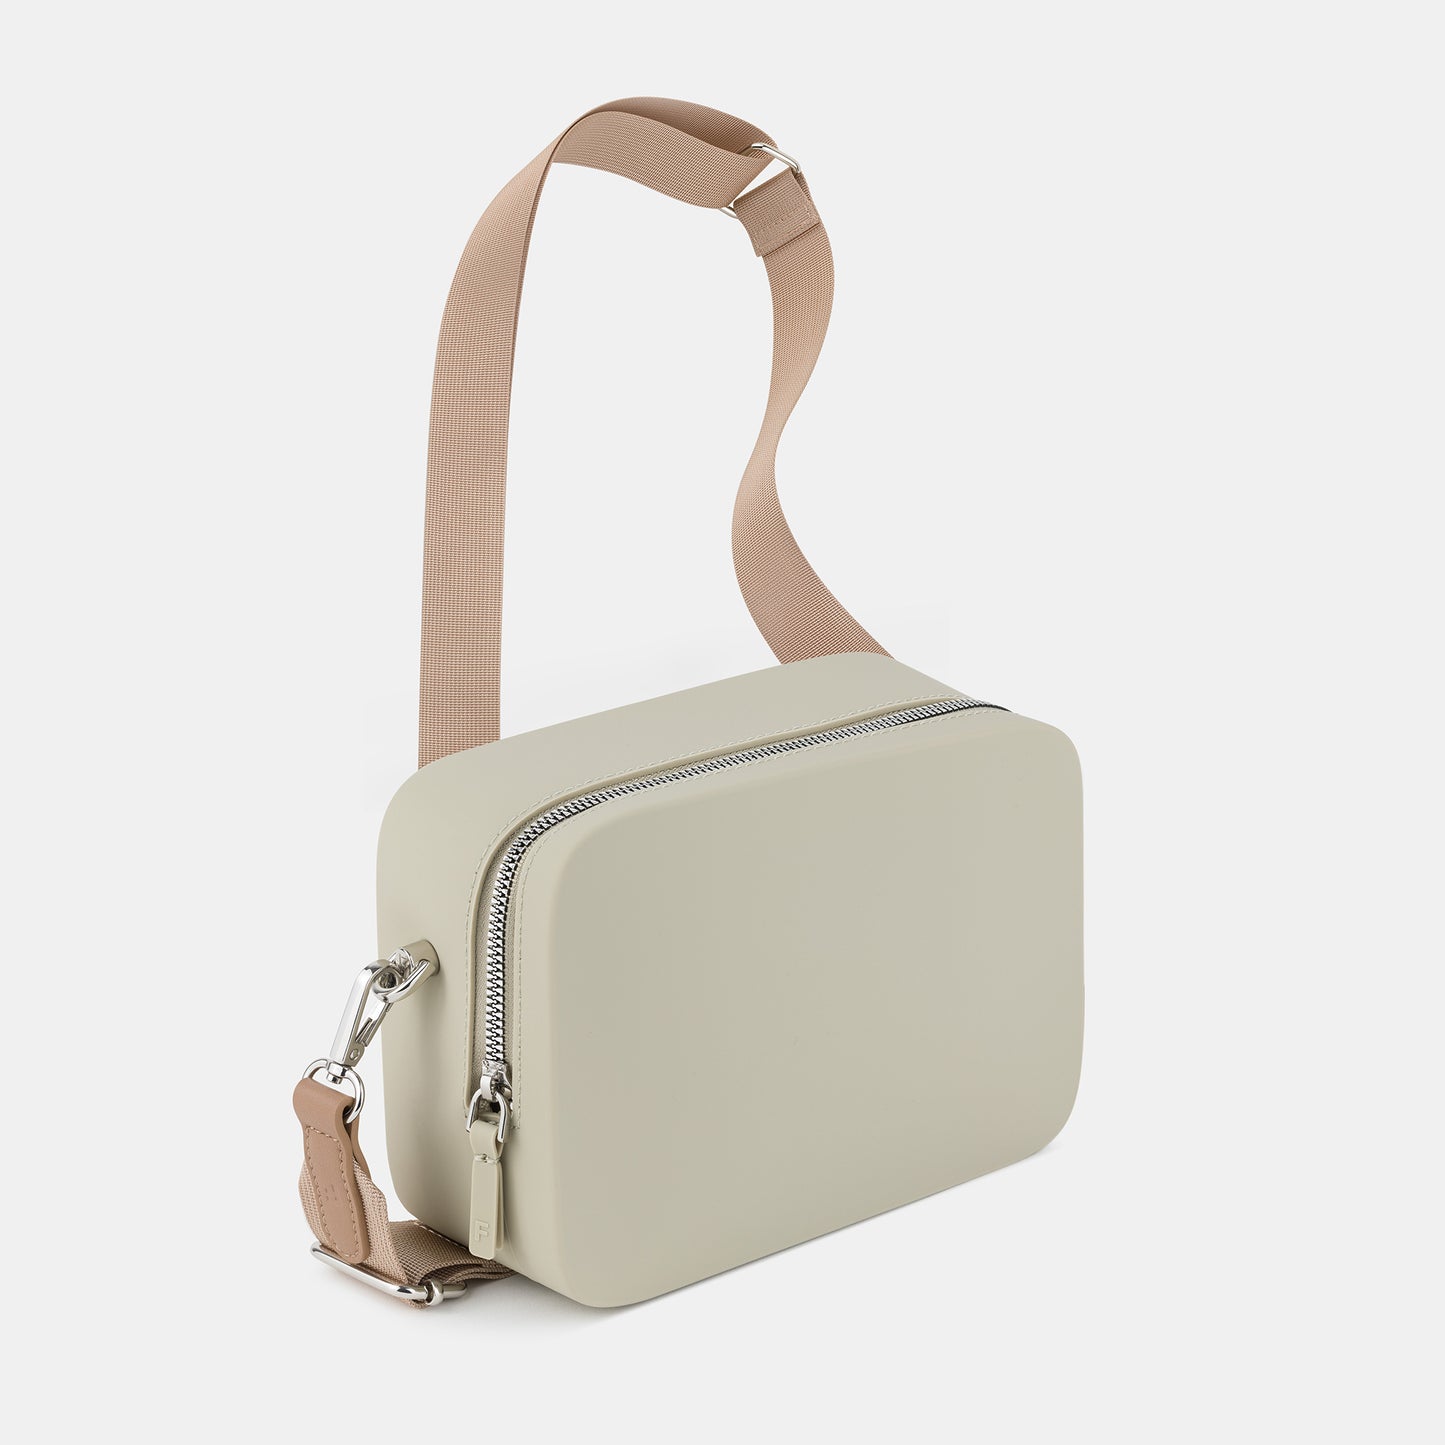 Chelsea Sport | Sage Green with Light Strap